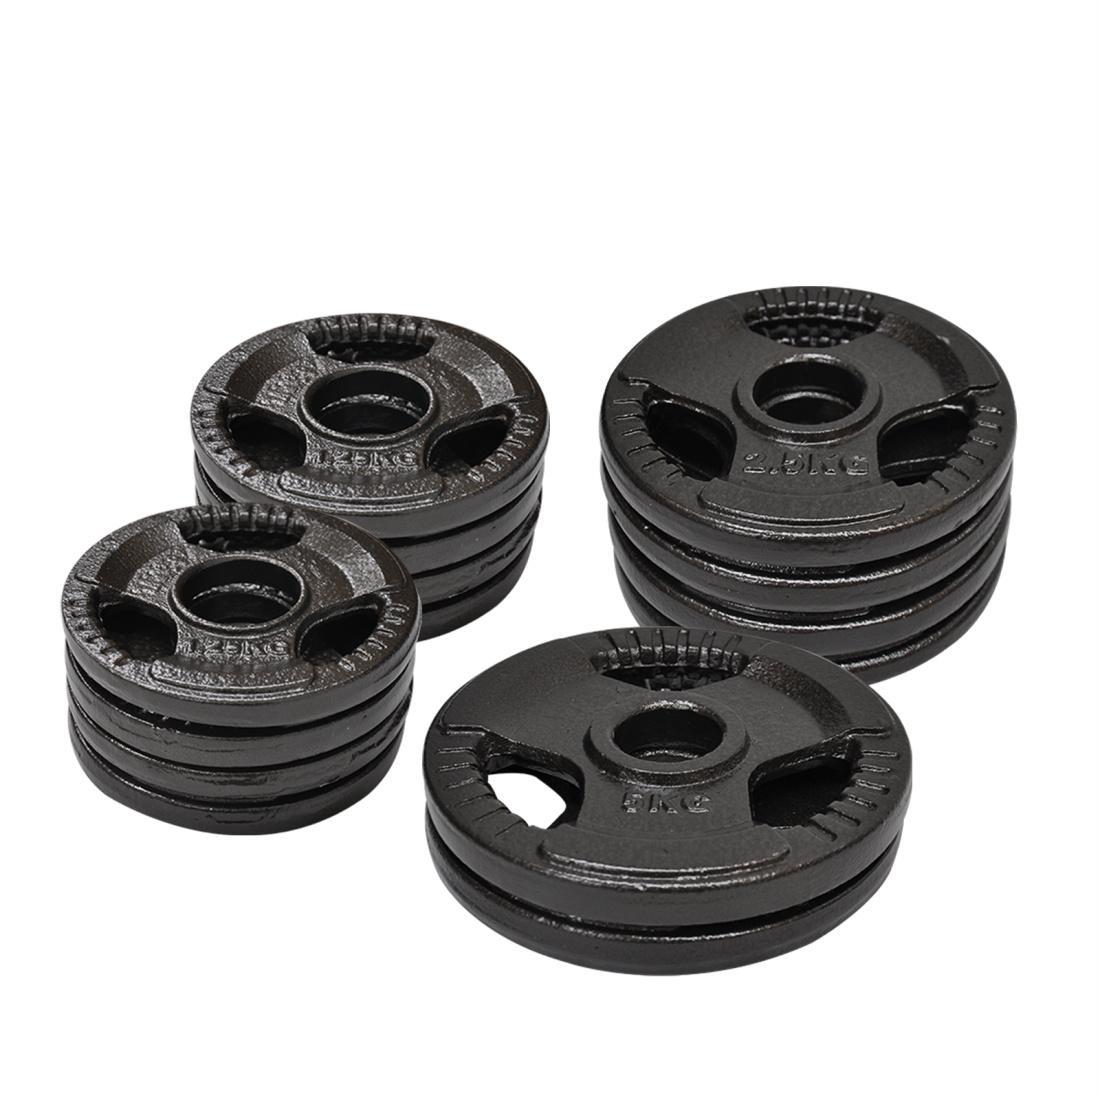 Total 30kg Olympic Cast Iron Weight Plate - 1.25kgx8 + 2.5kgx4 + 5kgx2 - Energetics Home Gym